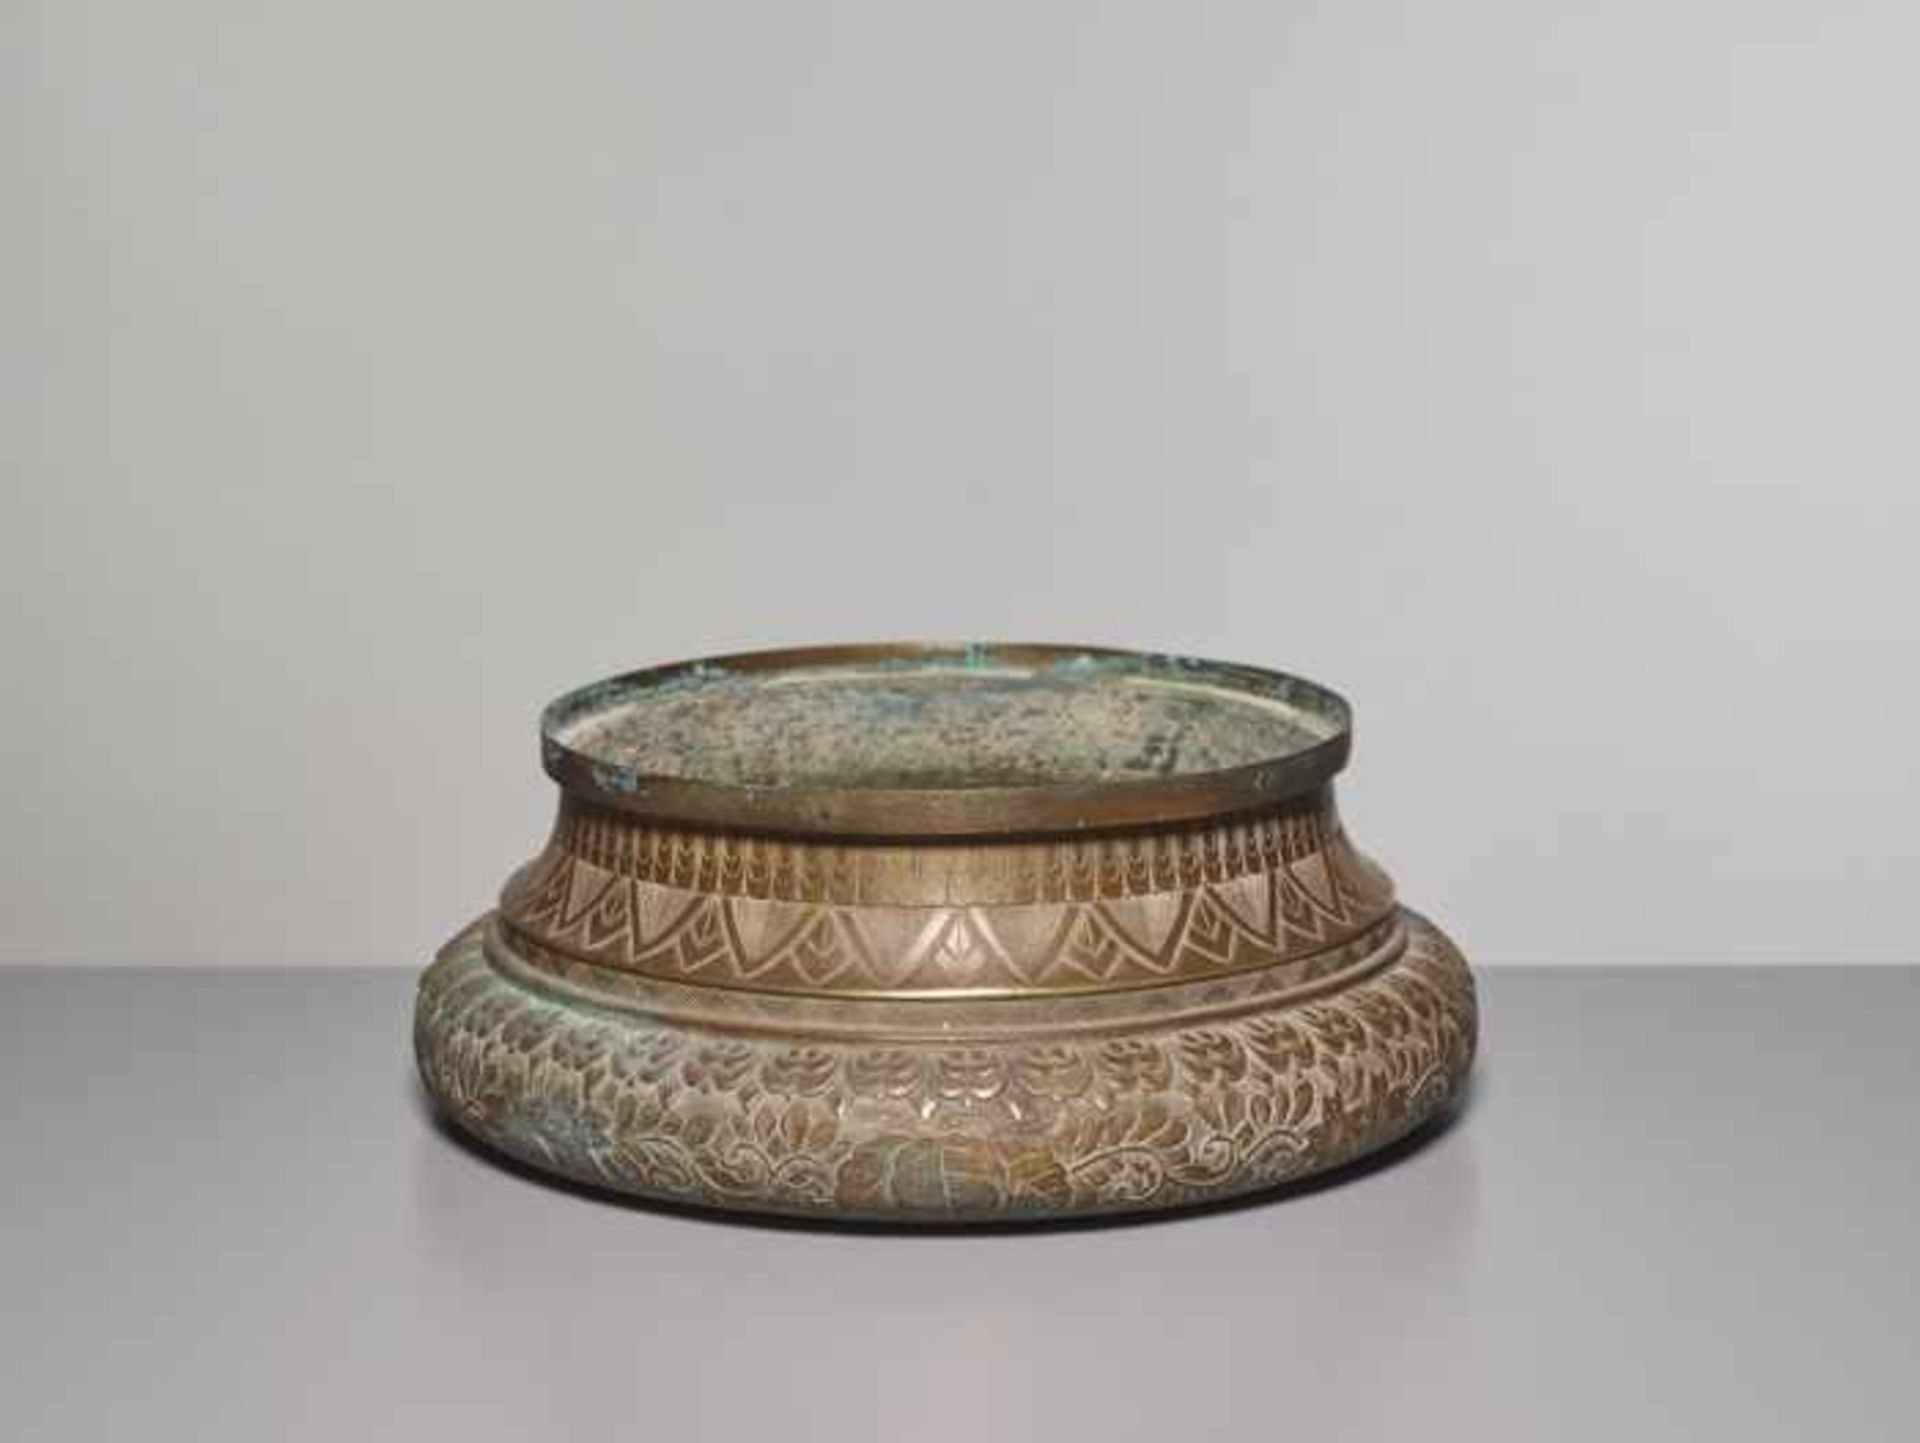 AN ENGRAVED BRONZE BASIN, QING DYNASTY Cast of massive and heavy bronze, with neatly incised - Image 6 of 6